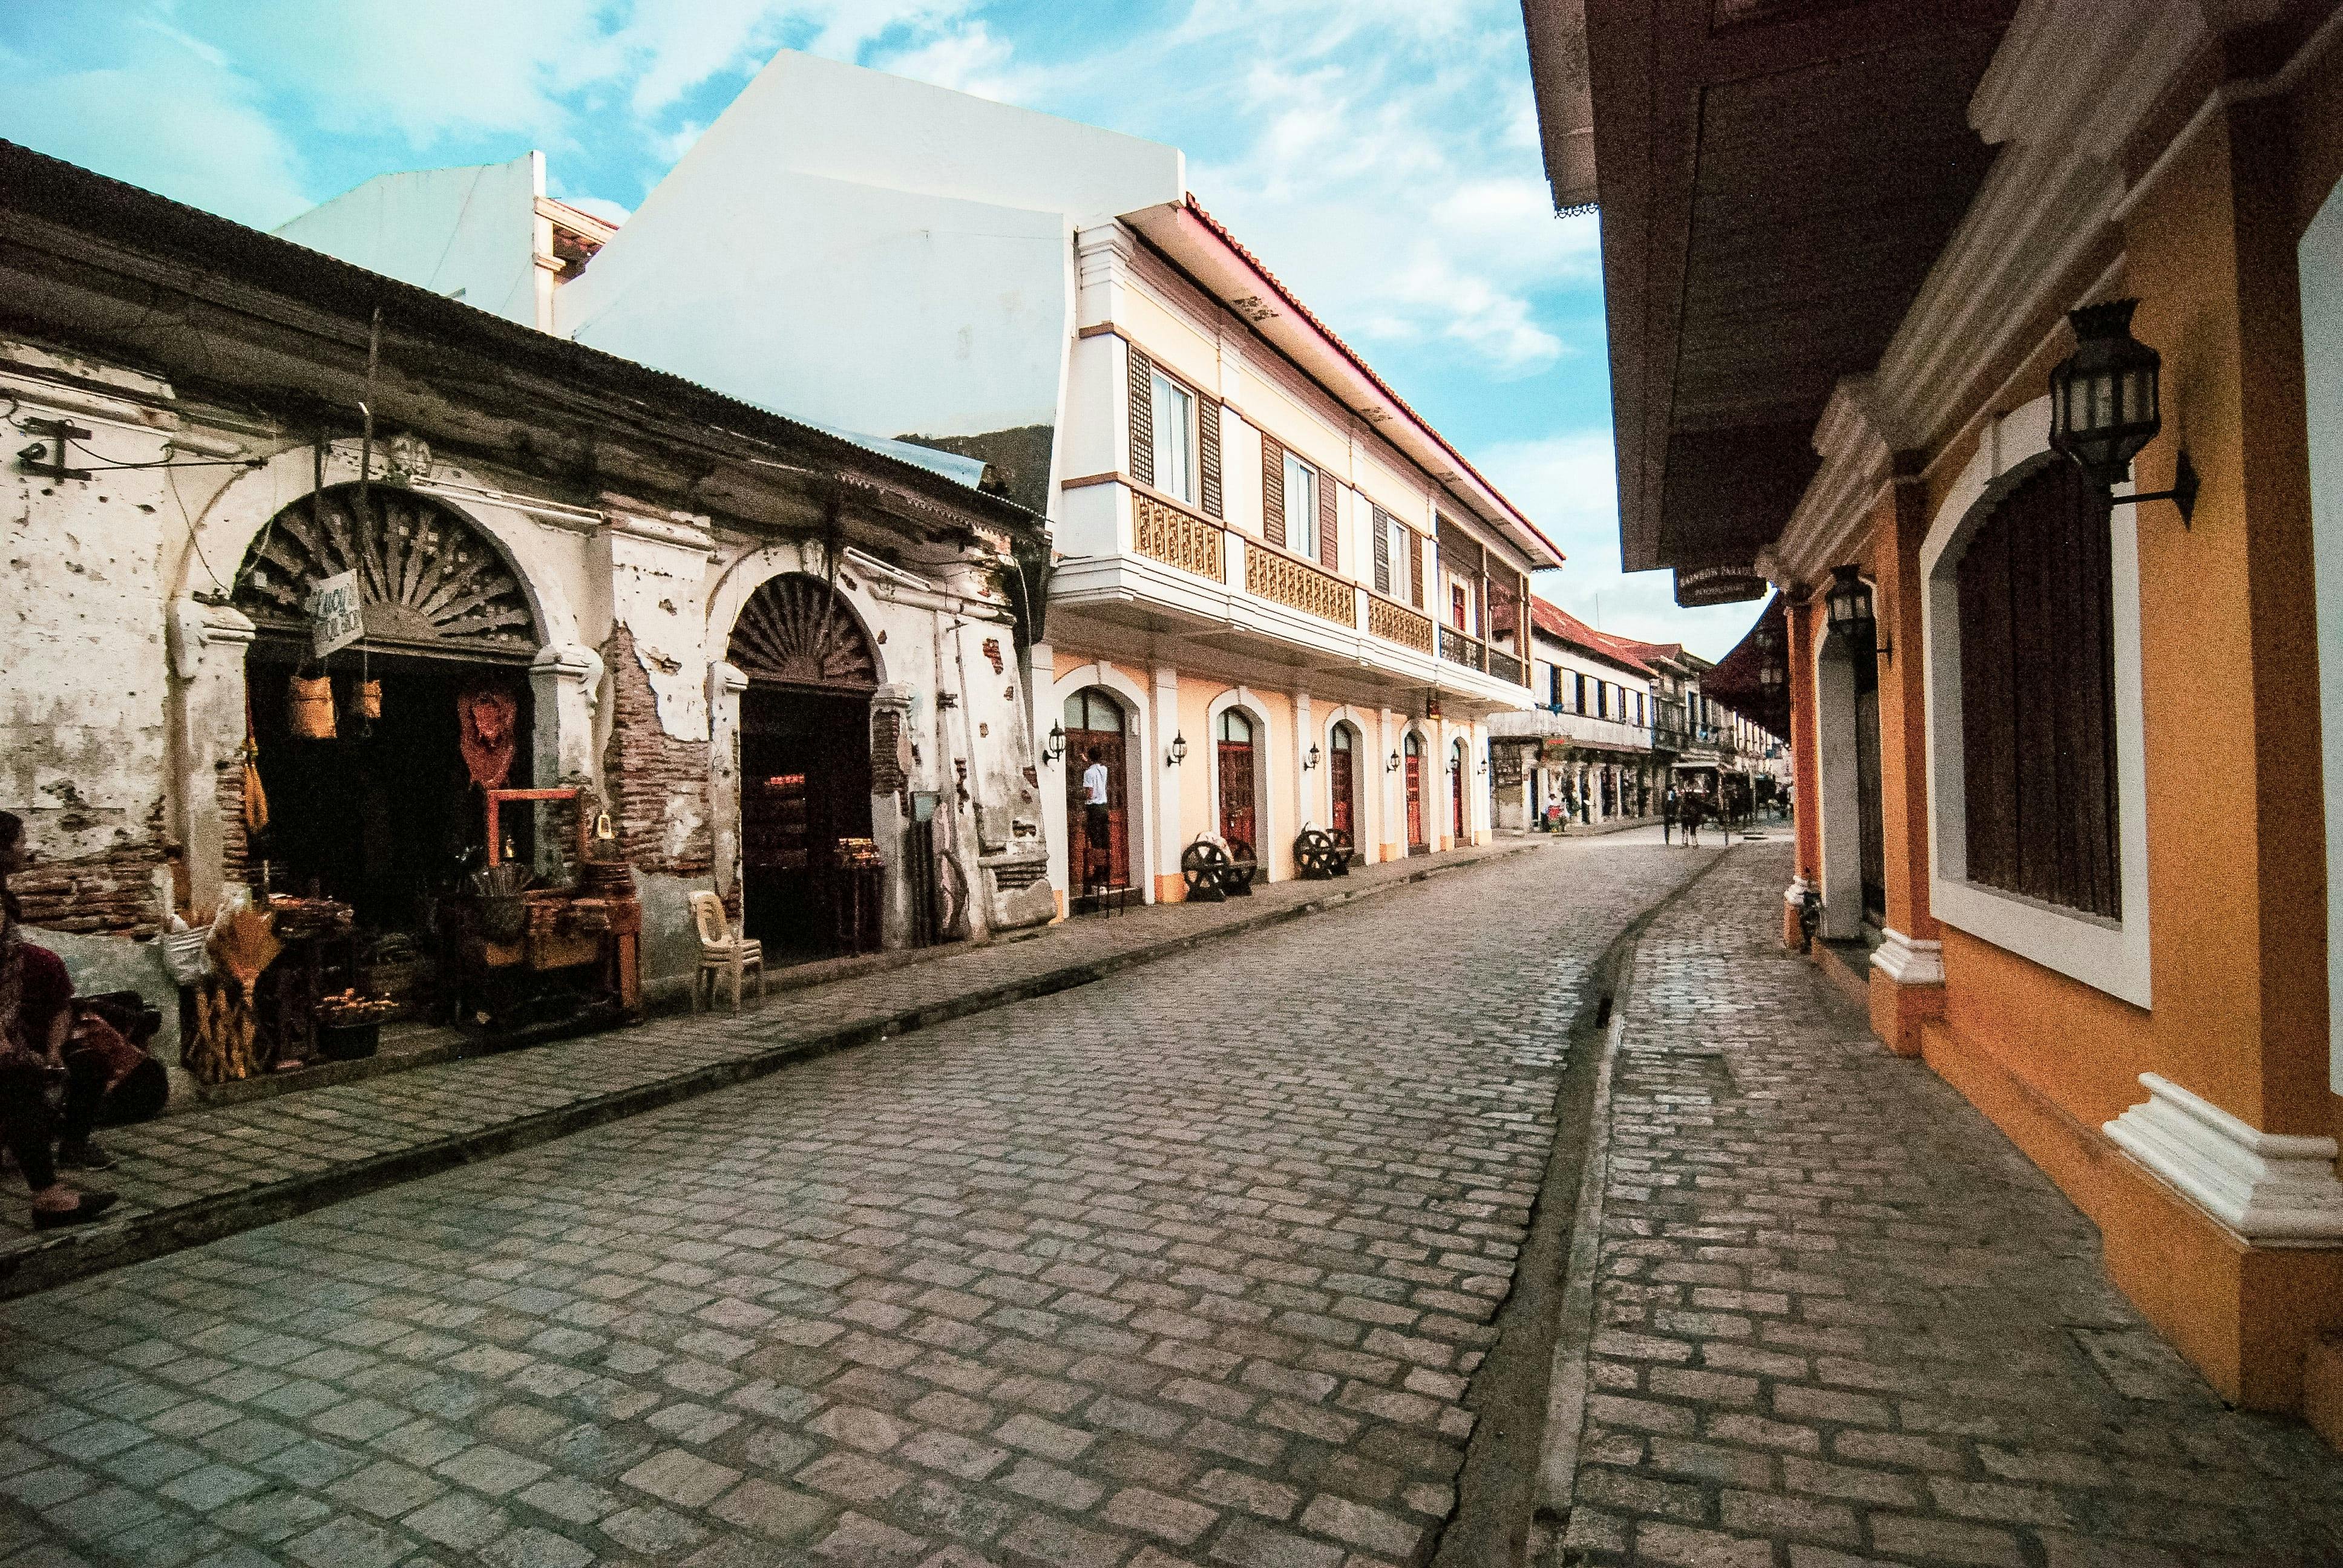 Spanish-style streets of Calle Crisologo which are popular among travellers